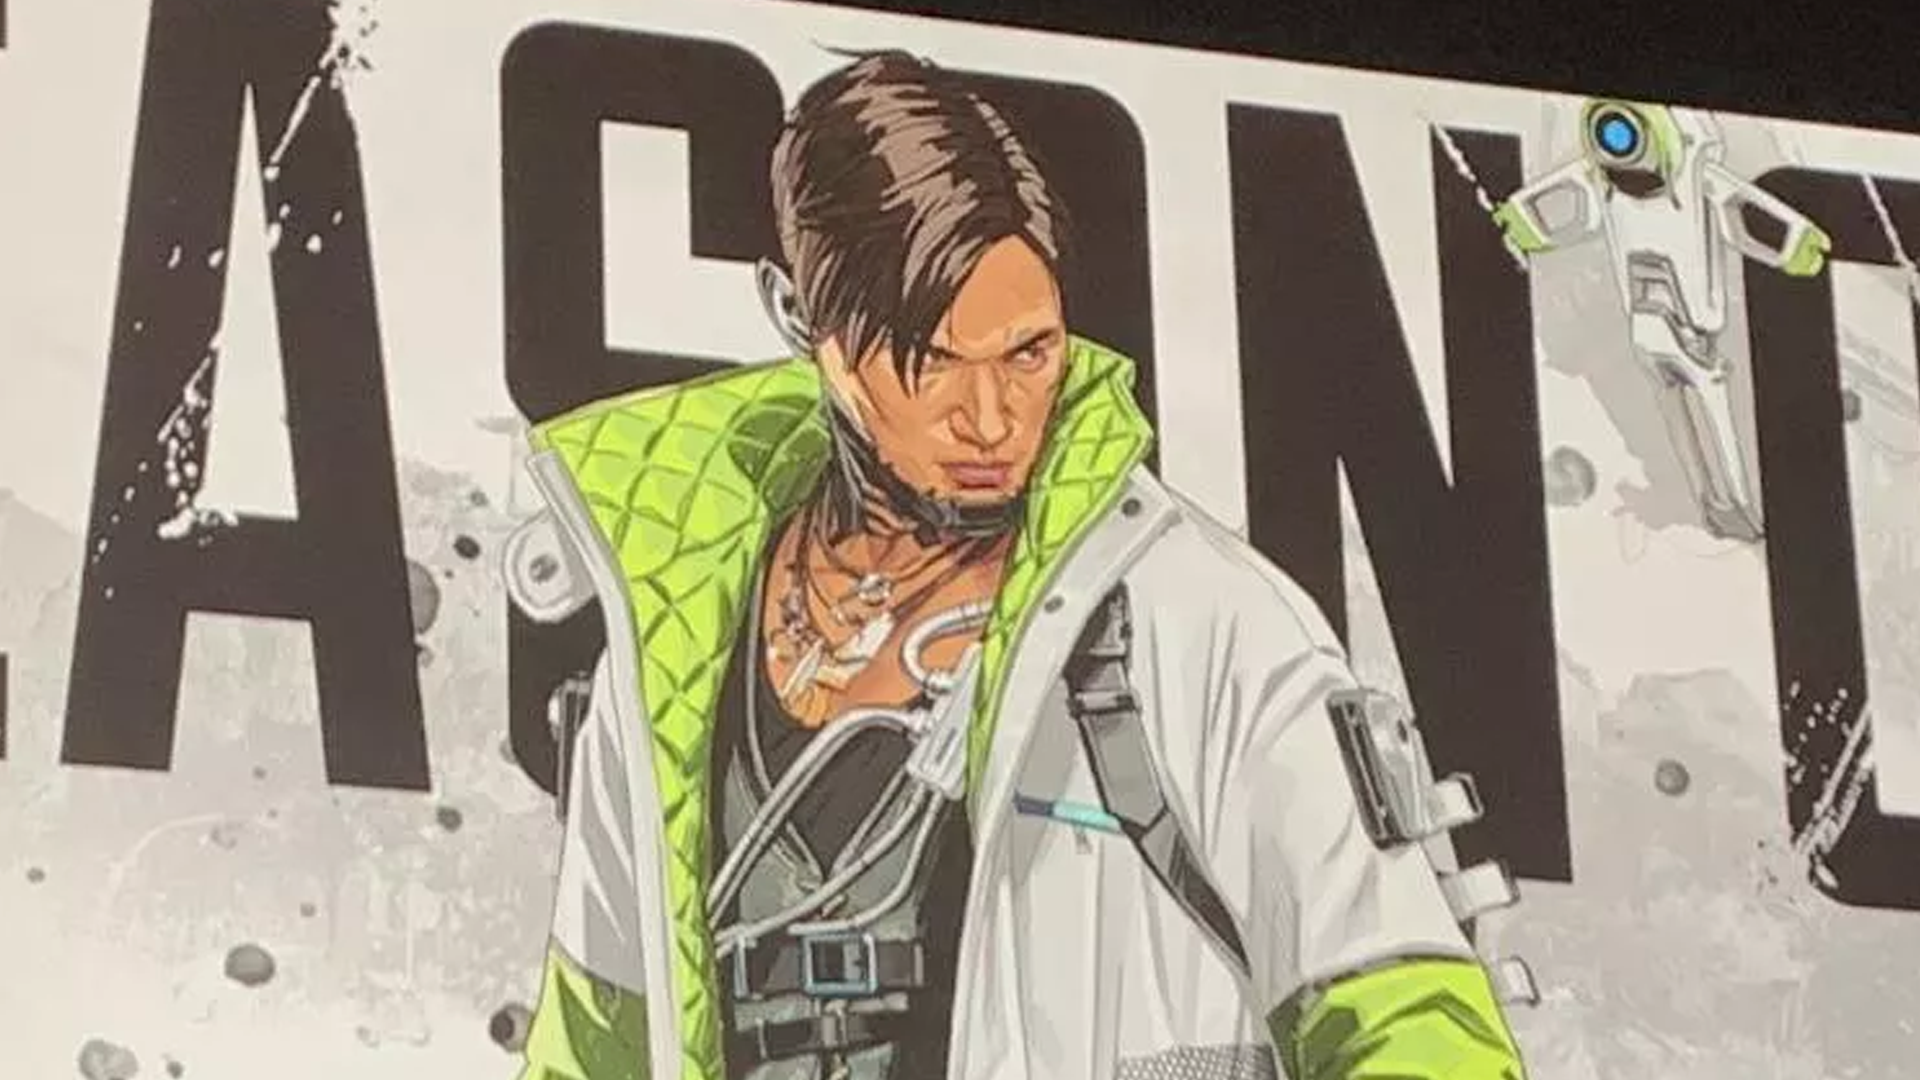 Apex Legends Data Miners Have Leaked Upcoming Characters And Abilities